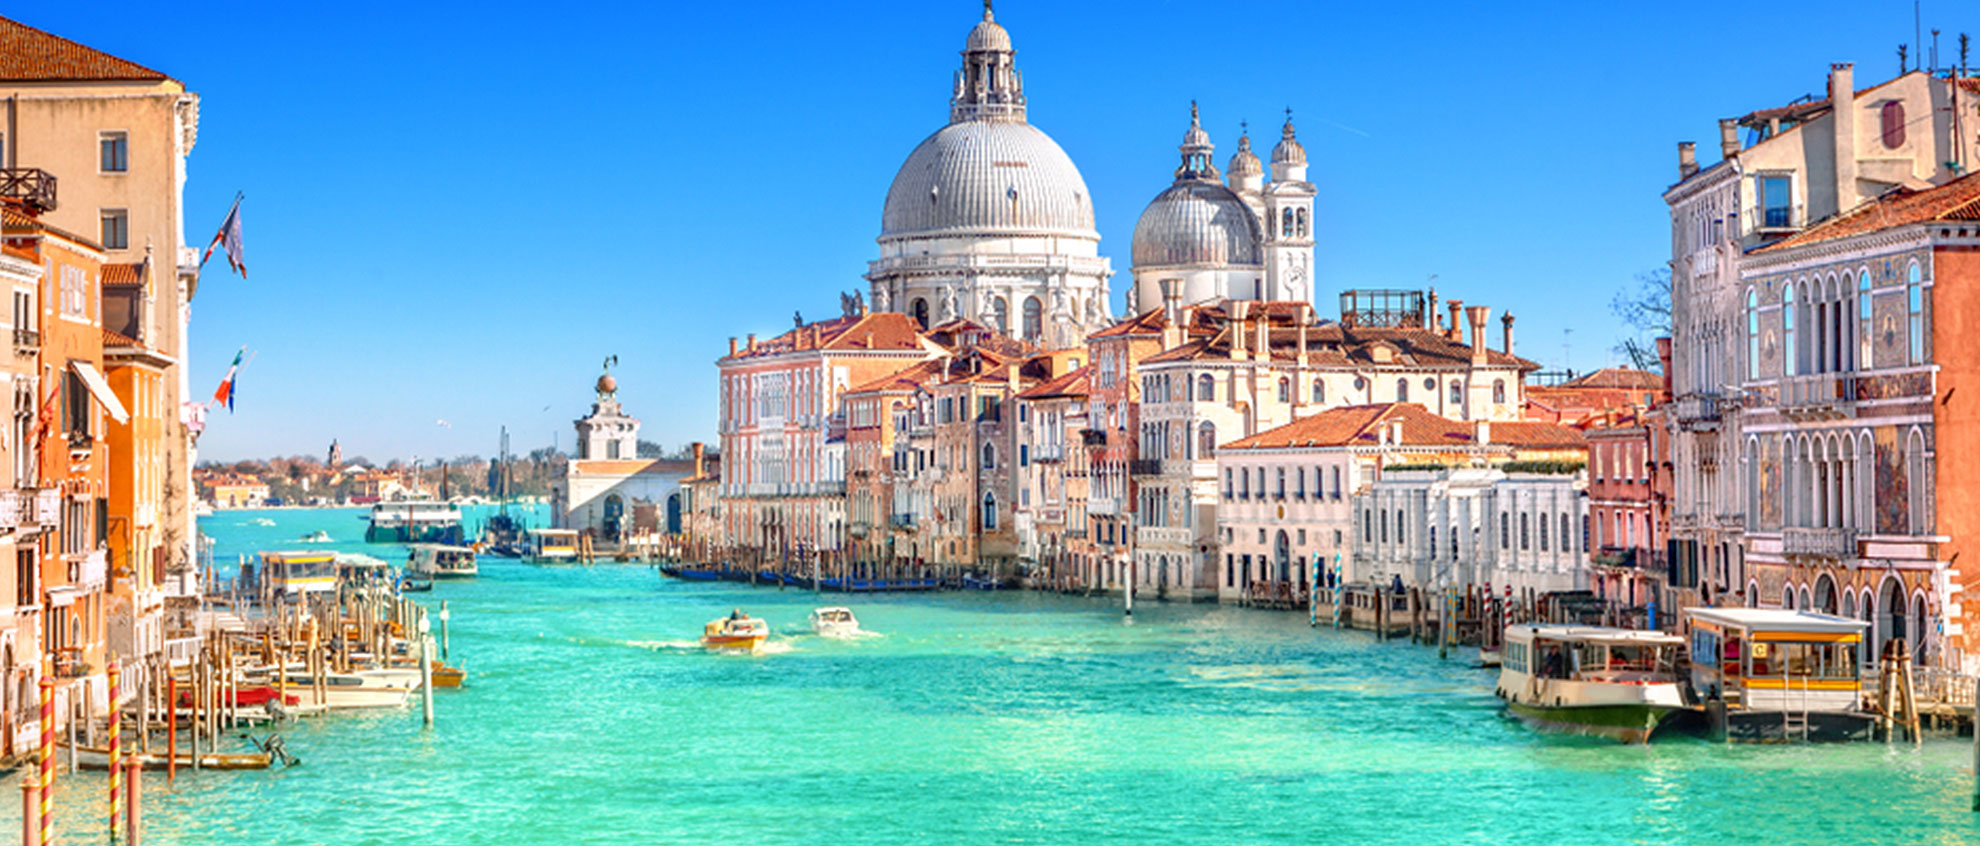 Venice Car Hire Get in the Driving Seat Enjoy Travel